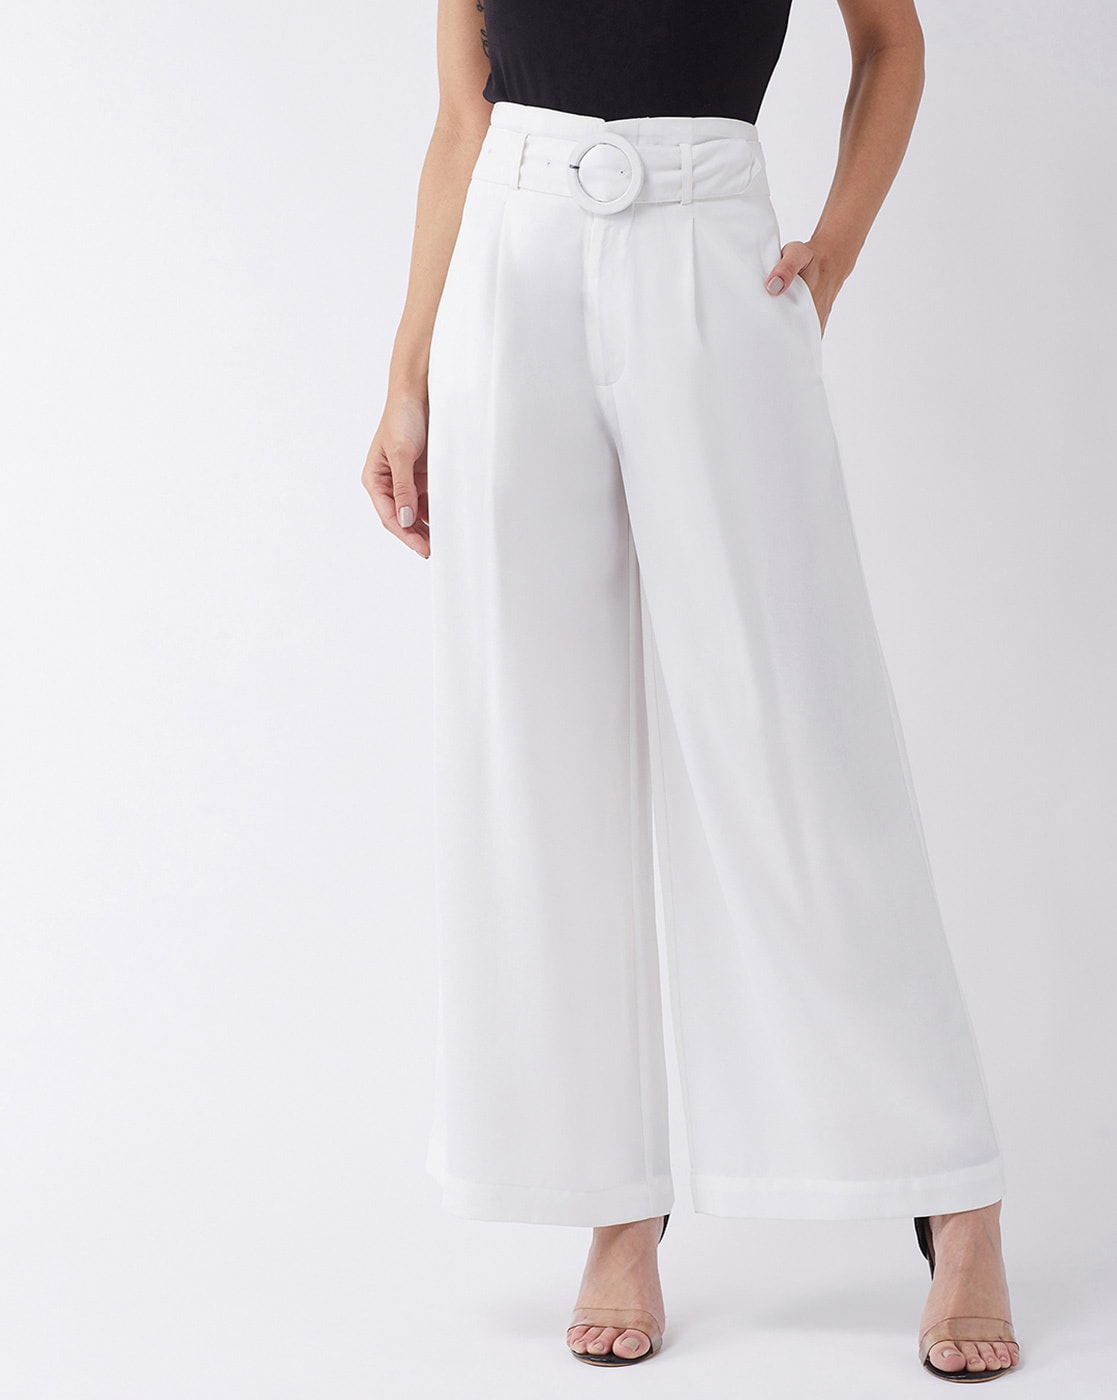 Details more than 82 white wide leg pants latest